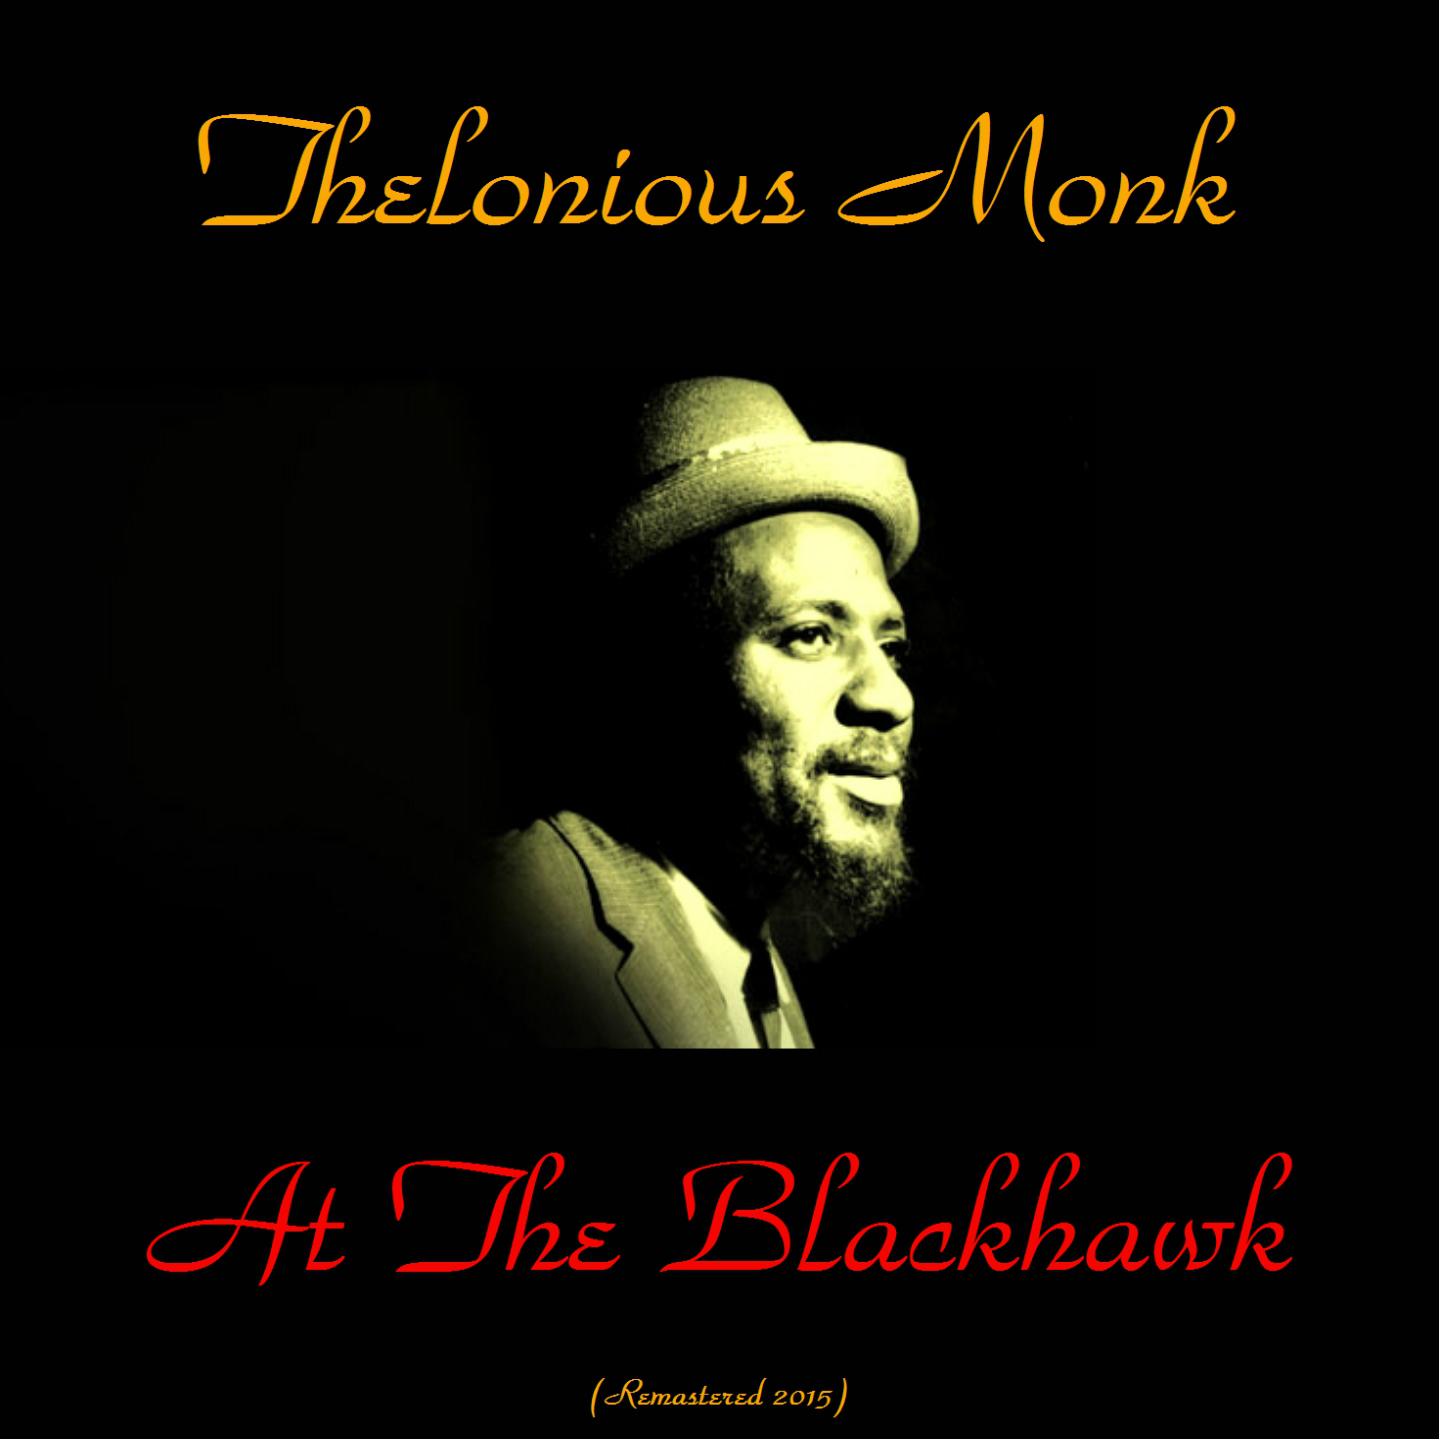 Thelonious Monk at the Blackhawk (Live) (Remastered 2015)